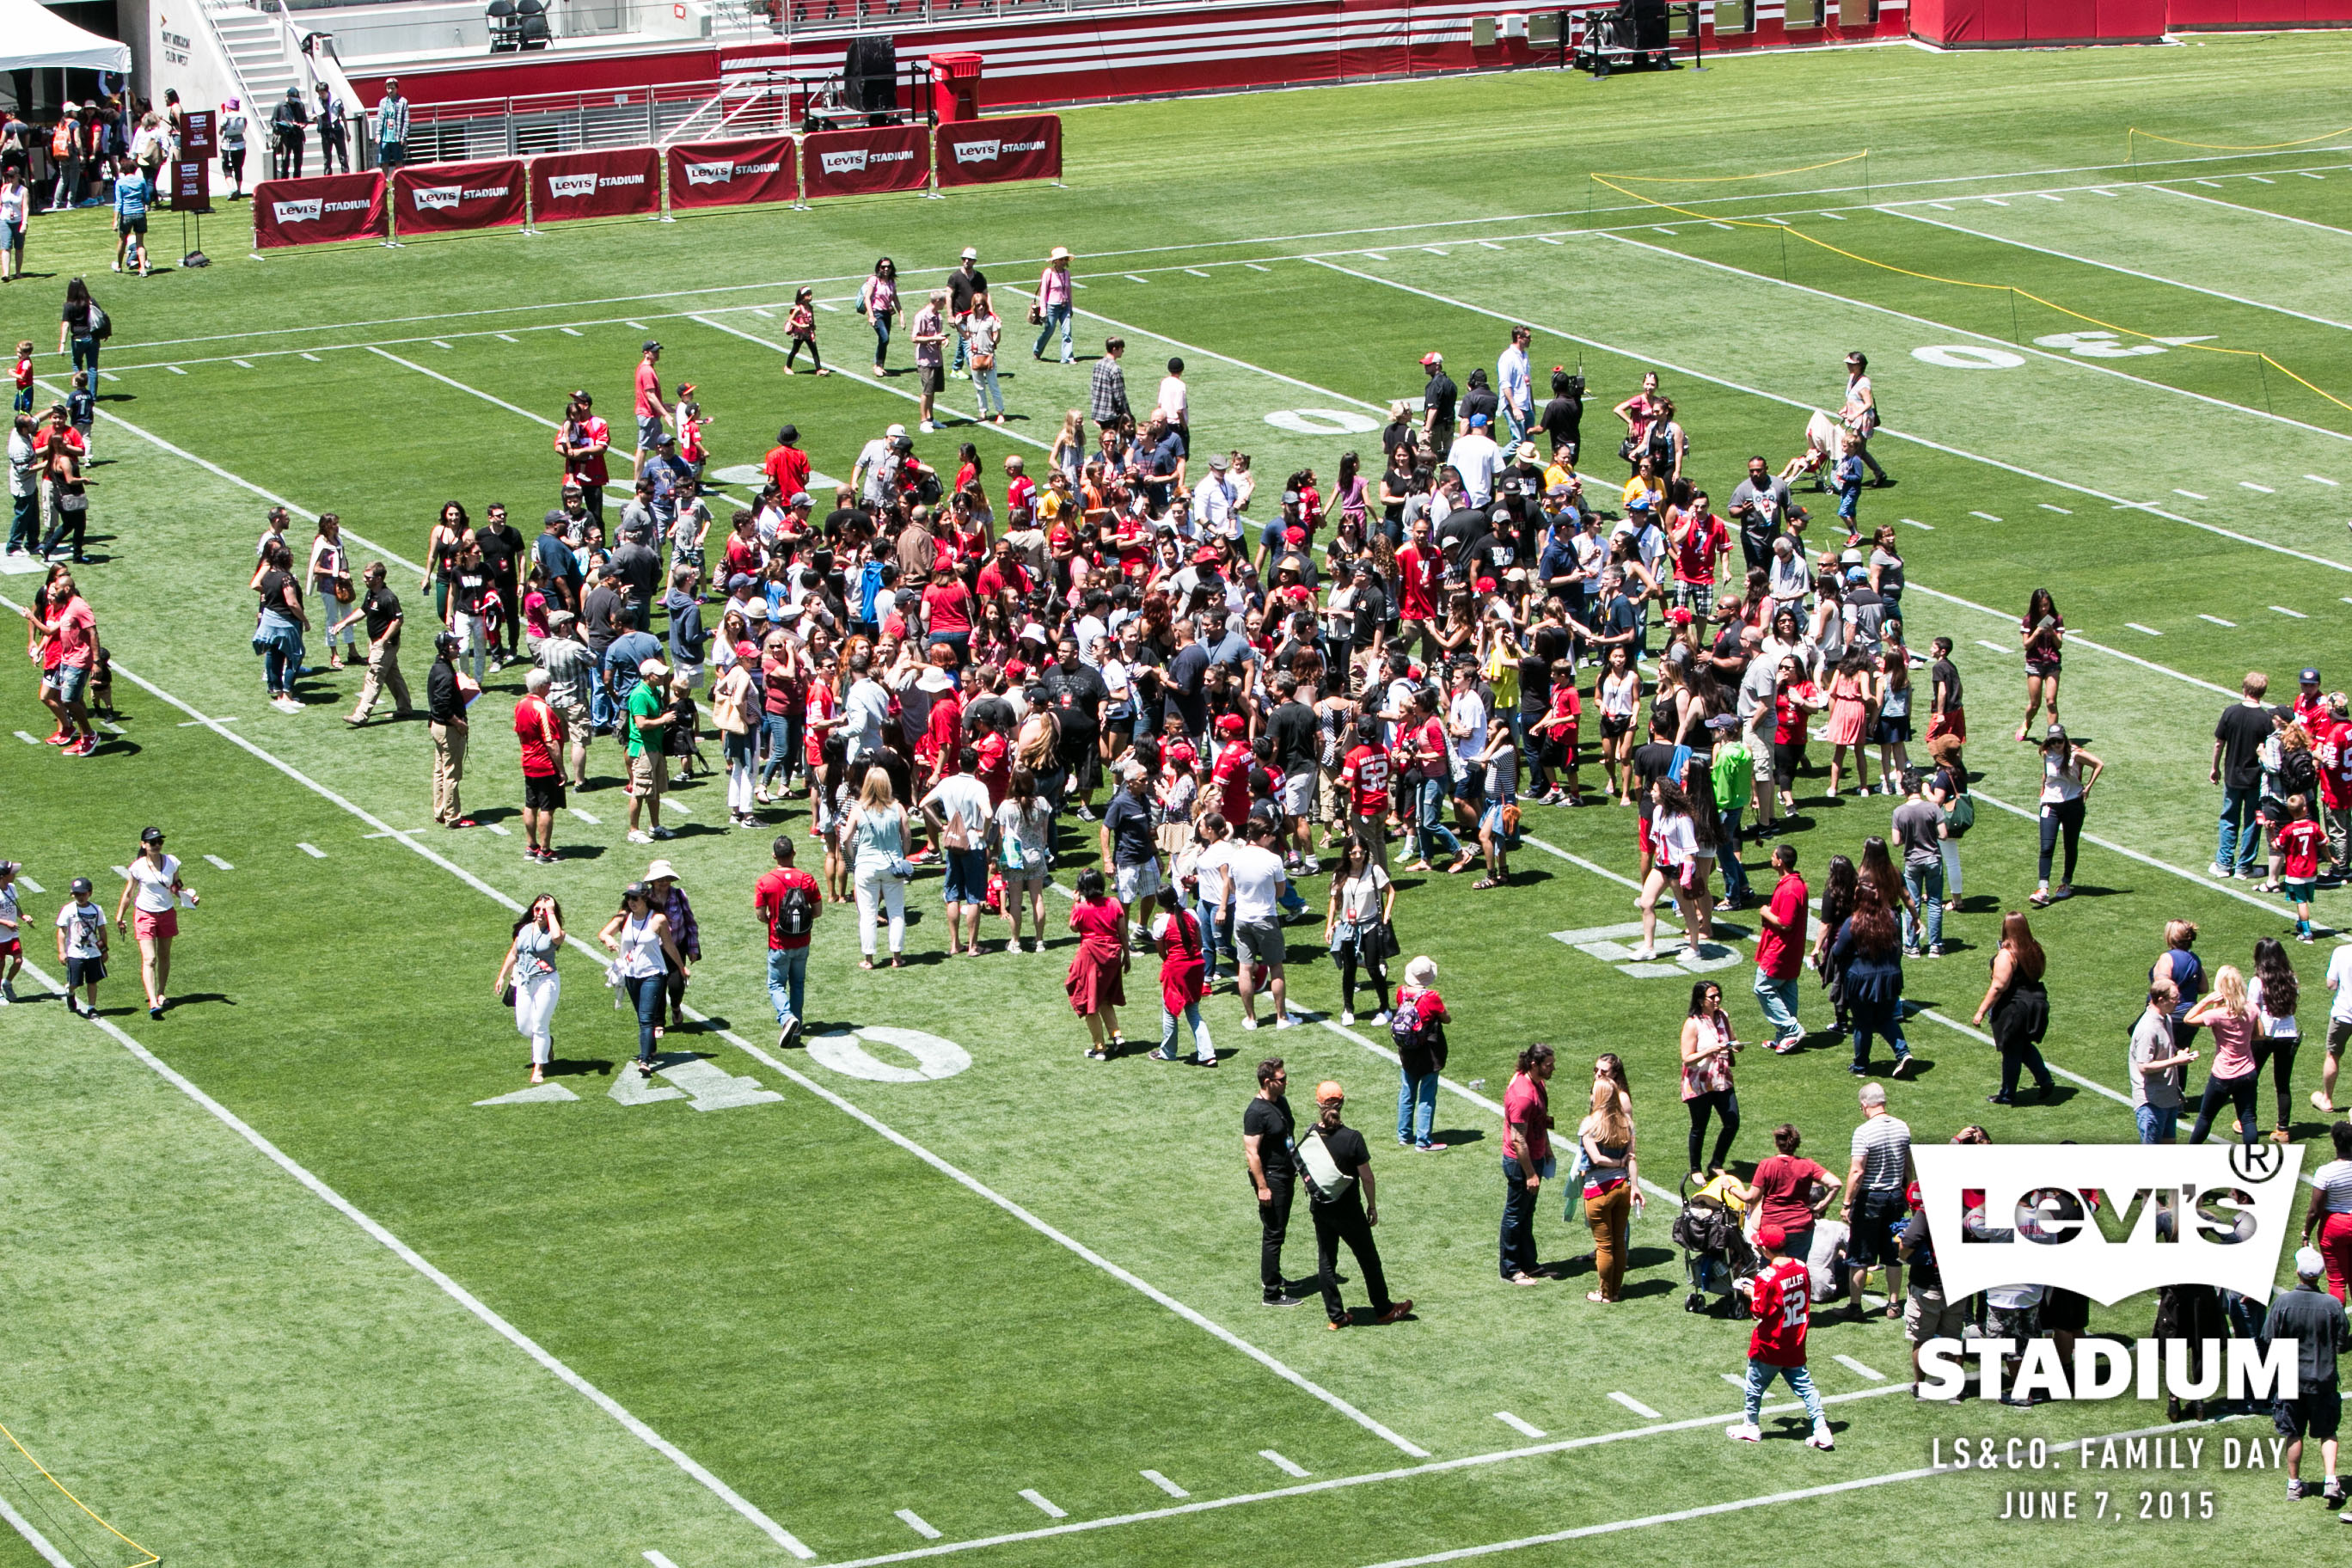 LS&Co. Employees Take the Field at Levi's Stadium : Levi Strauss & Co